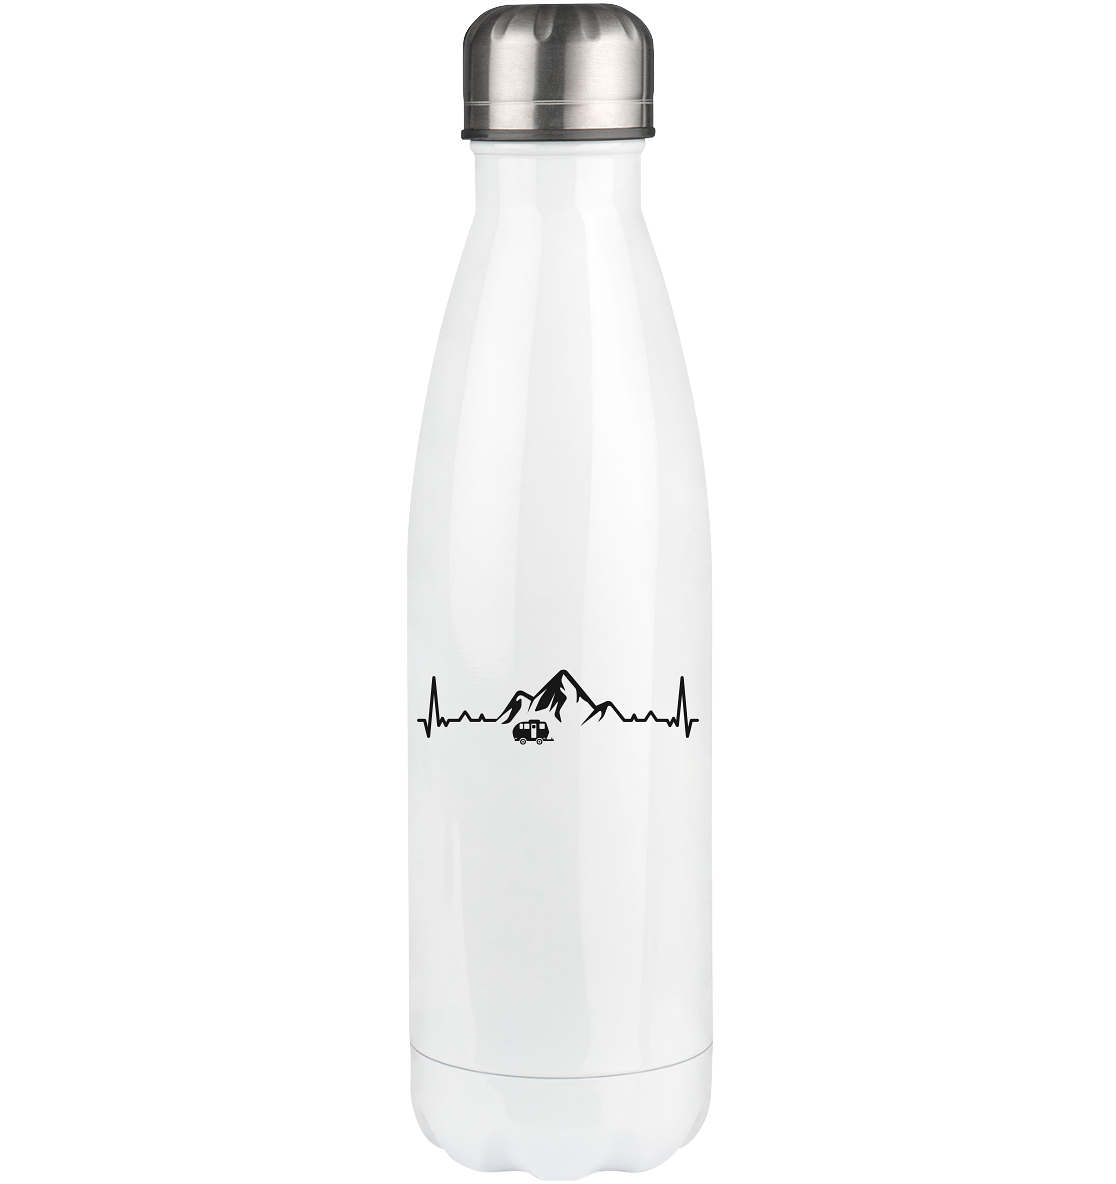 Heartbeat Mountain 1 and Camping - Edelstahl Thermosflasche camping UONP 500ml